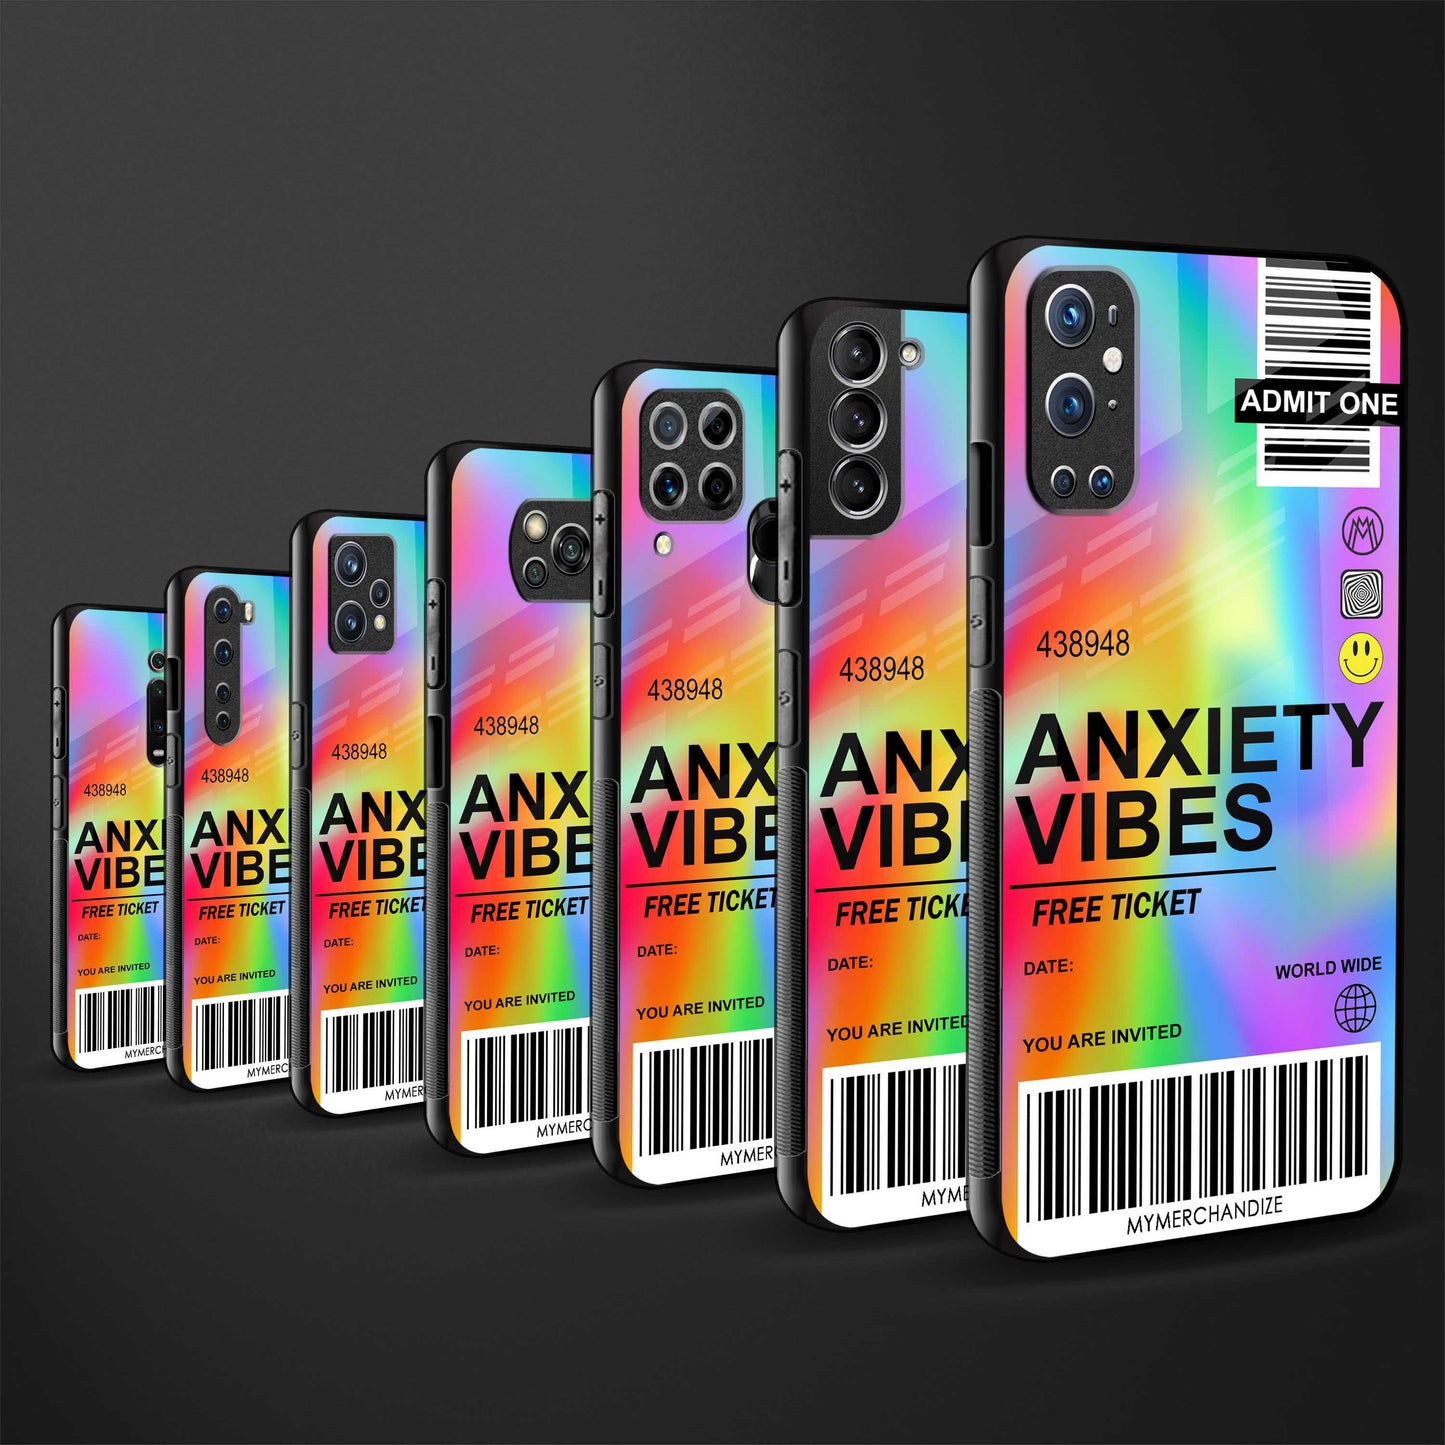 anxiety vibes back phone cover | glass case for samsung galaxy a23